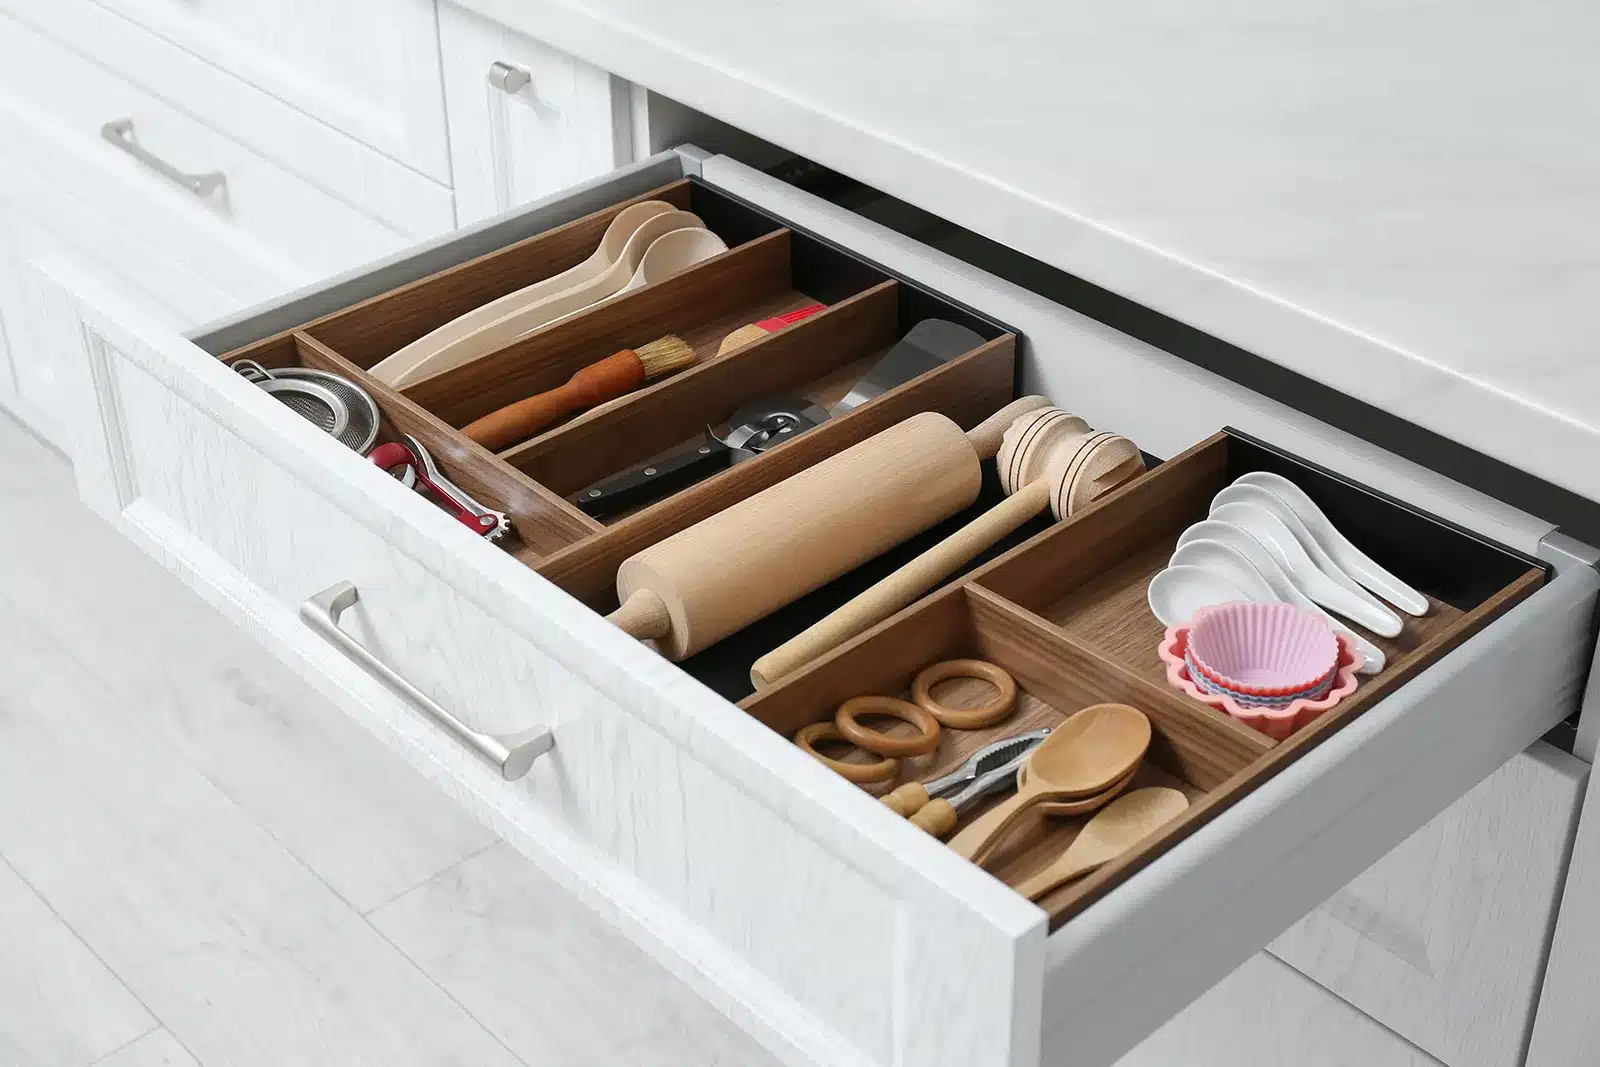 An open kitchen drawer featuring custom wooden dividers that neatly organize cooking utensils and baking tools at an accessible angle.